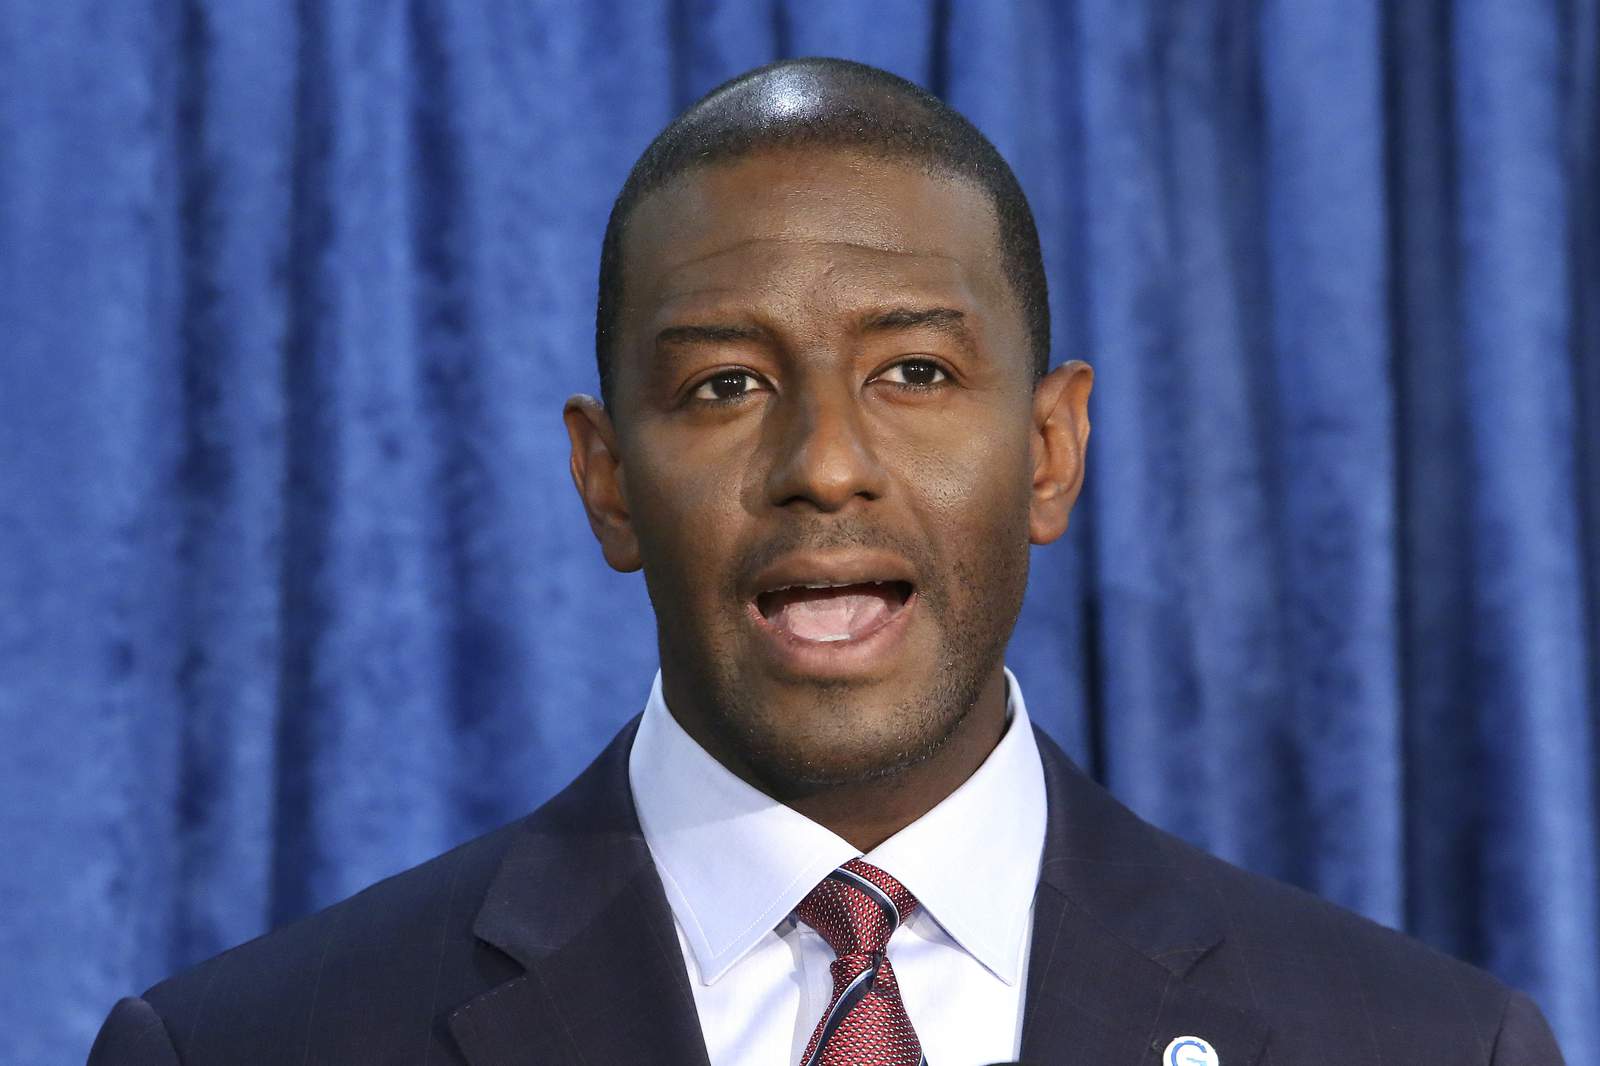 Former Florida governor candidate Andrew Gillum discusses depression, alcoholism after time in rehab